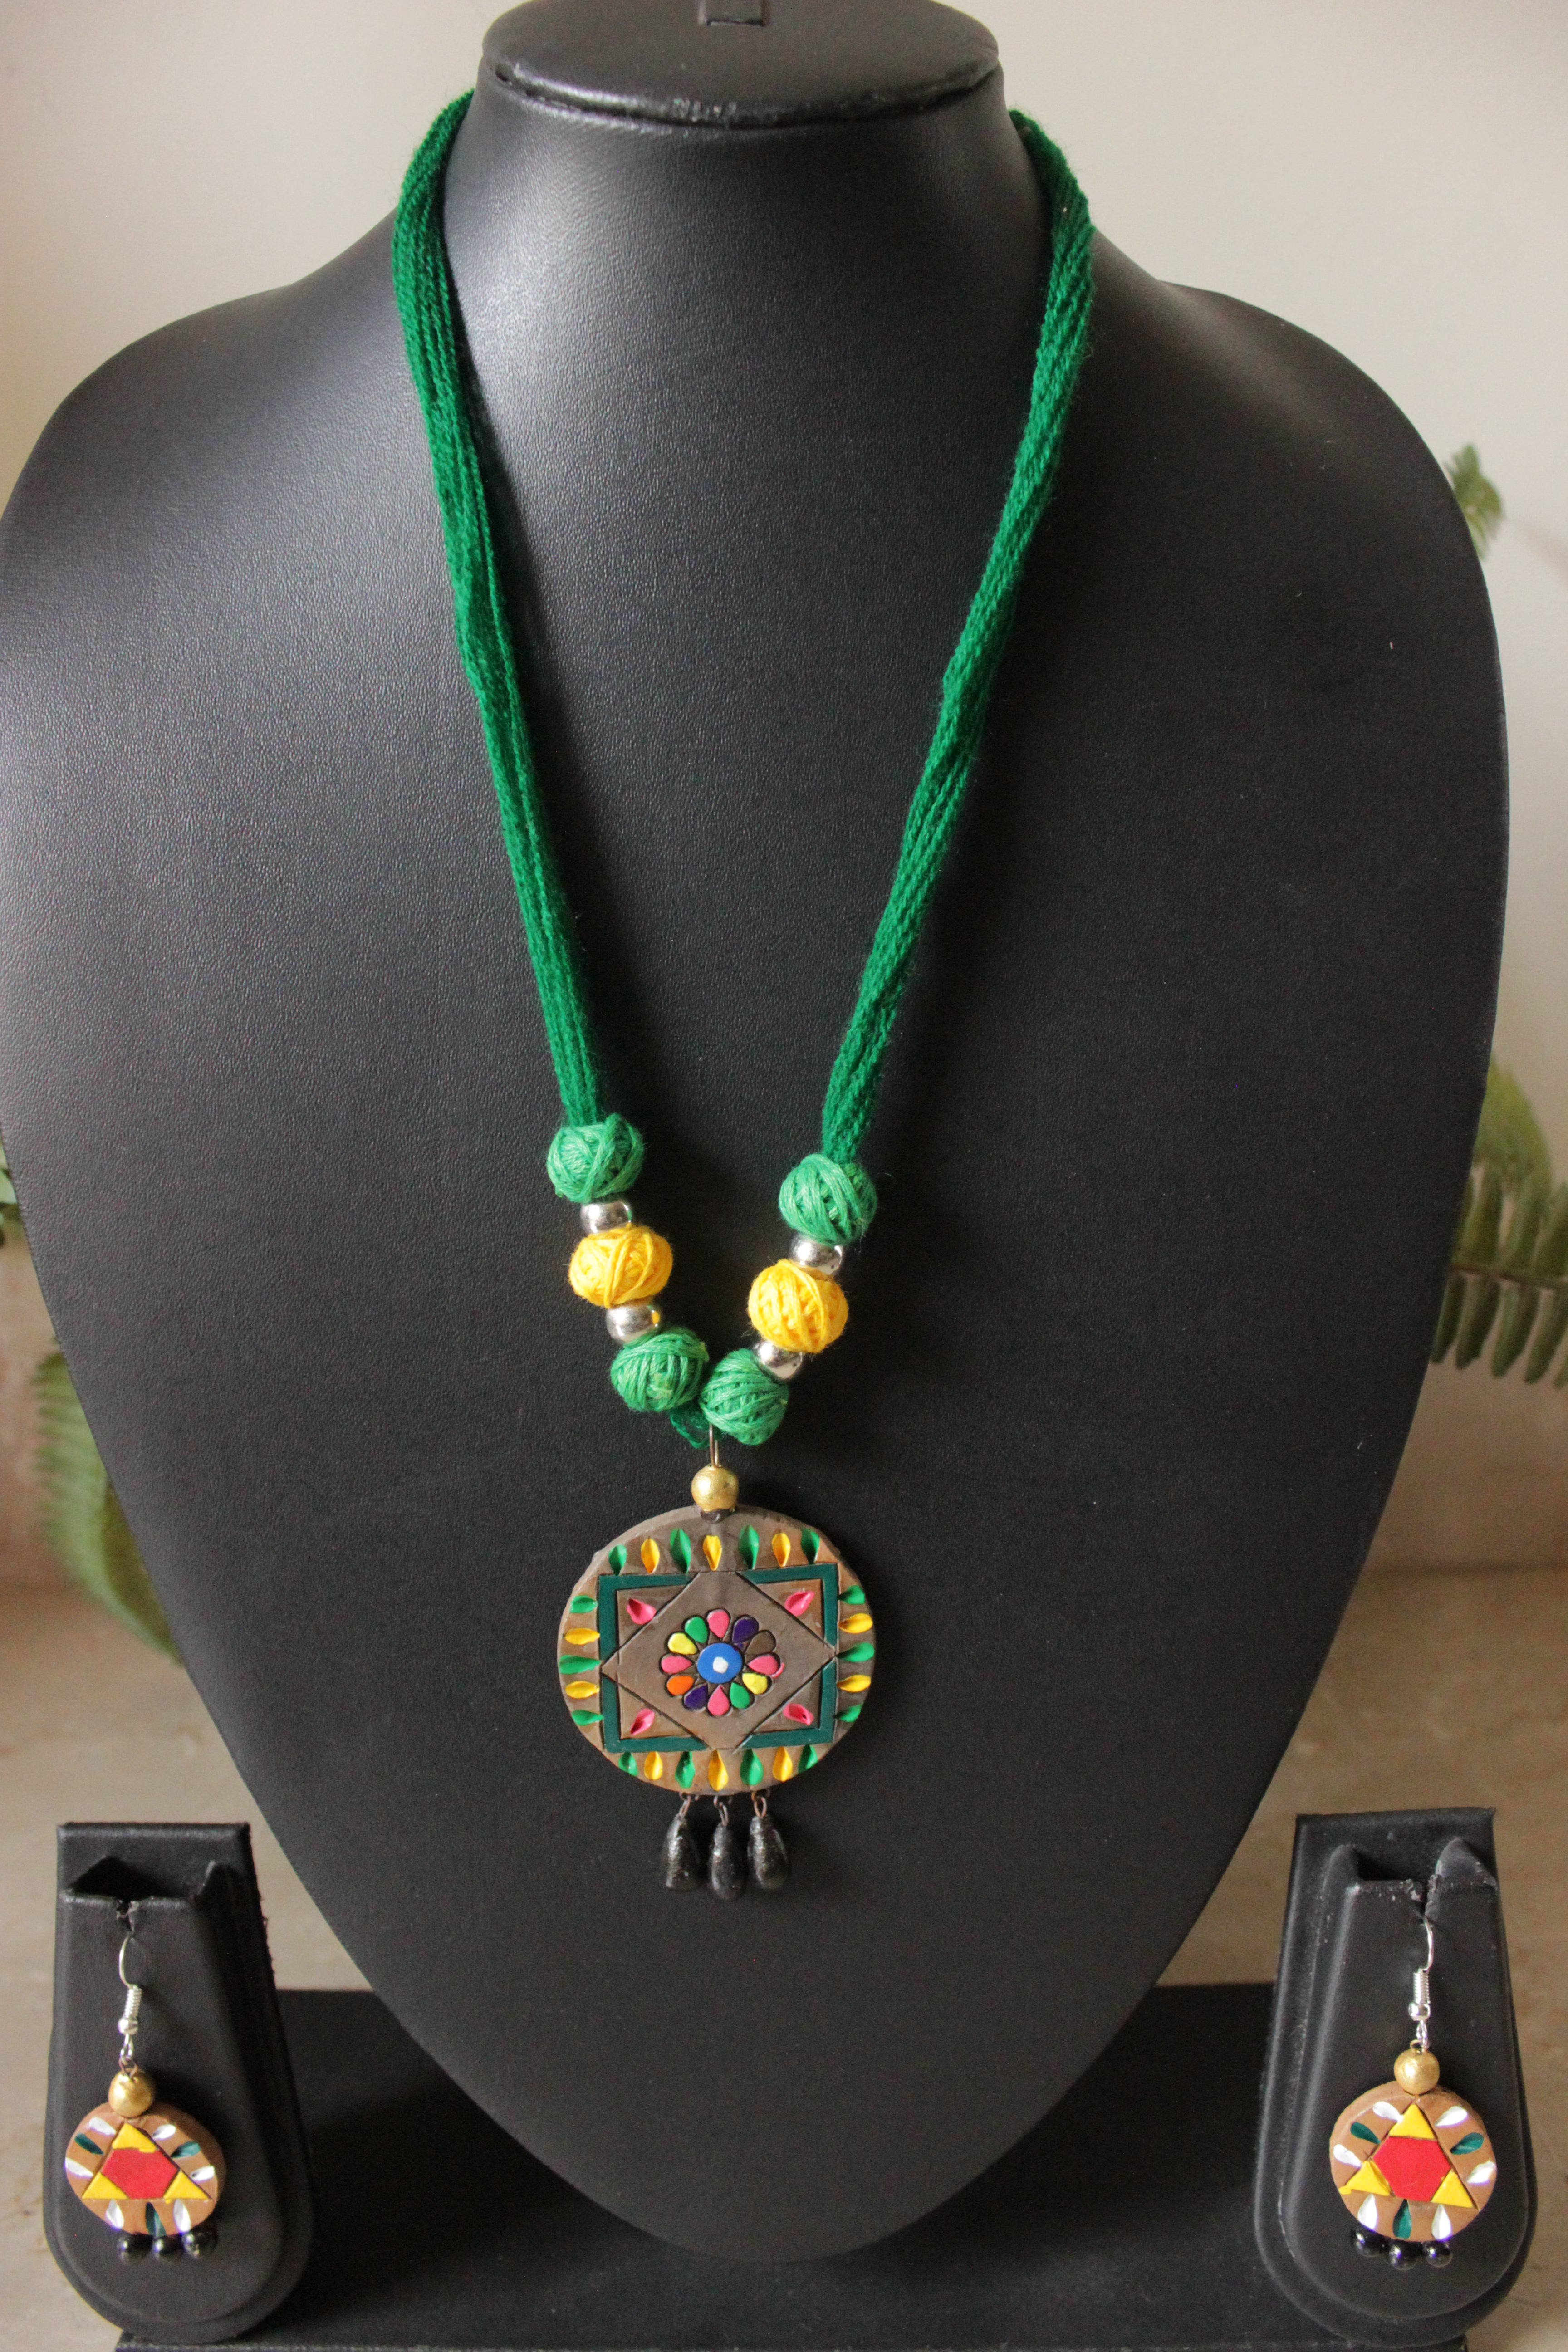 Handcrafted Earthy Brown & Green Terracotta Clay & Fabric Beads Adjustable Length Necklace Set